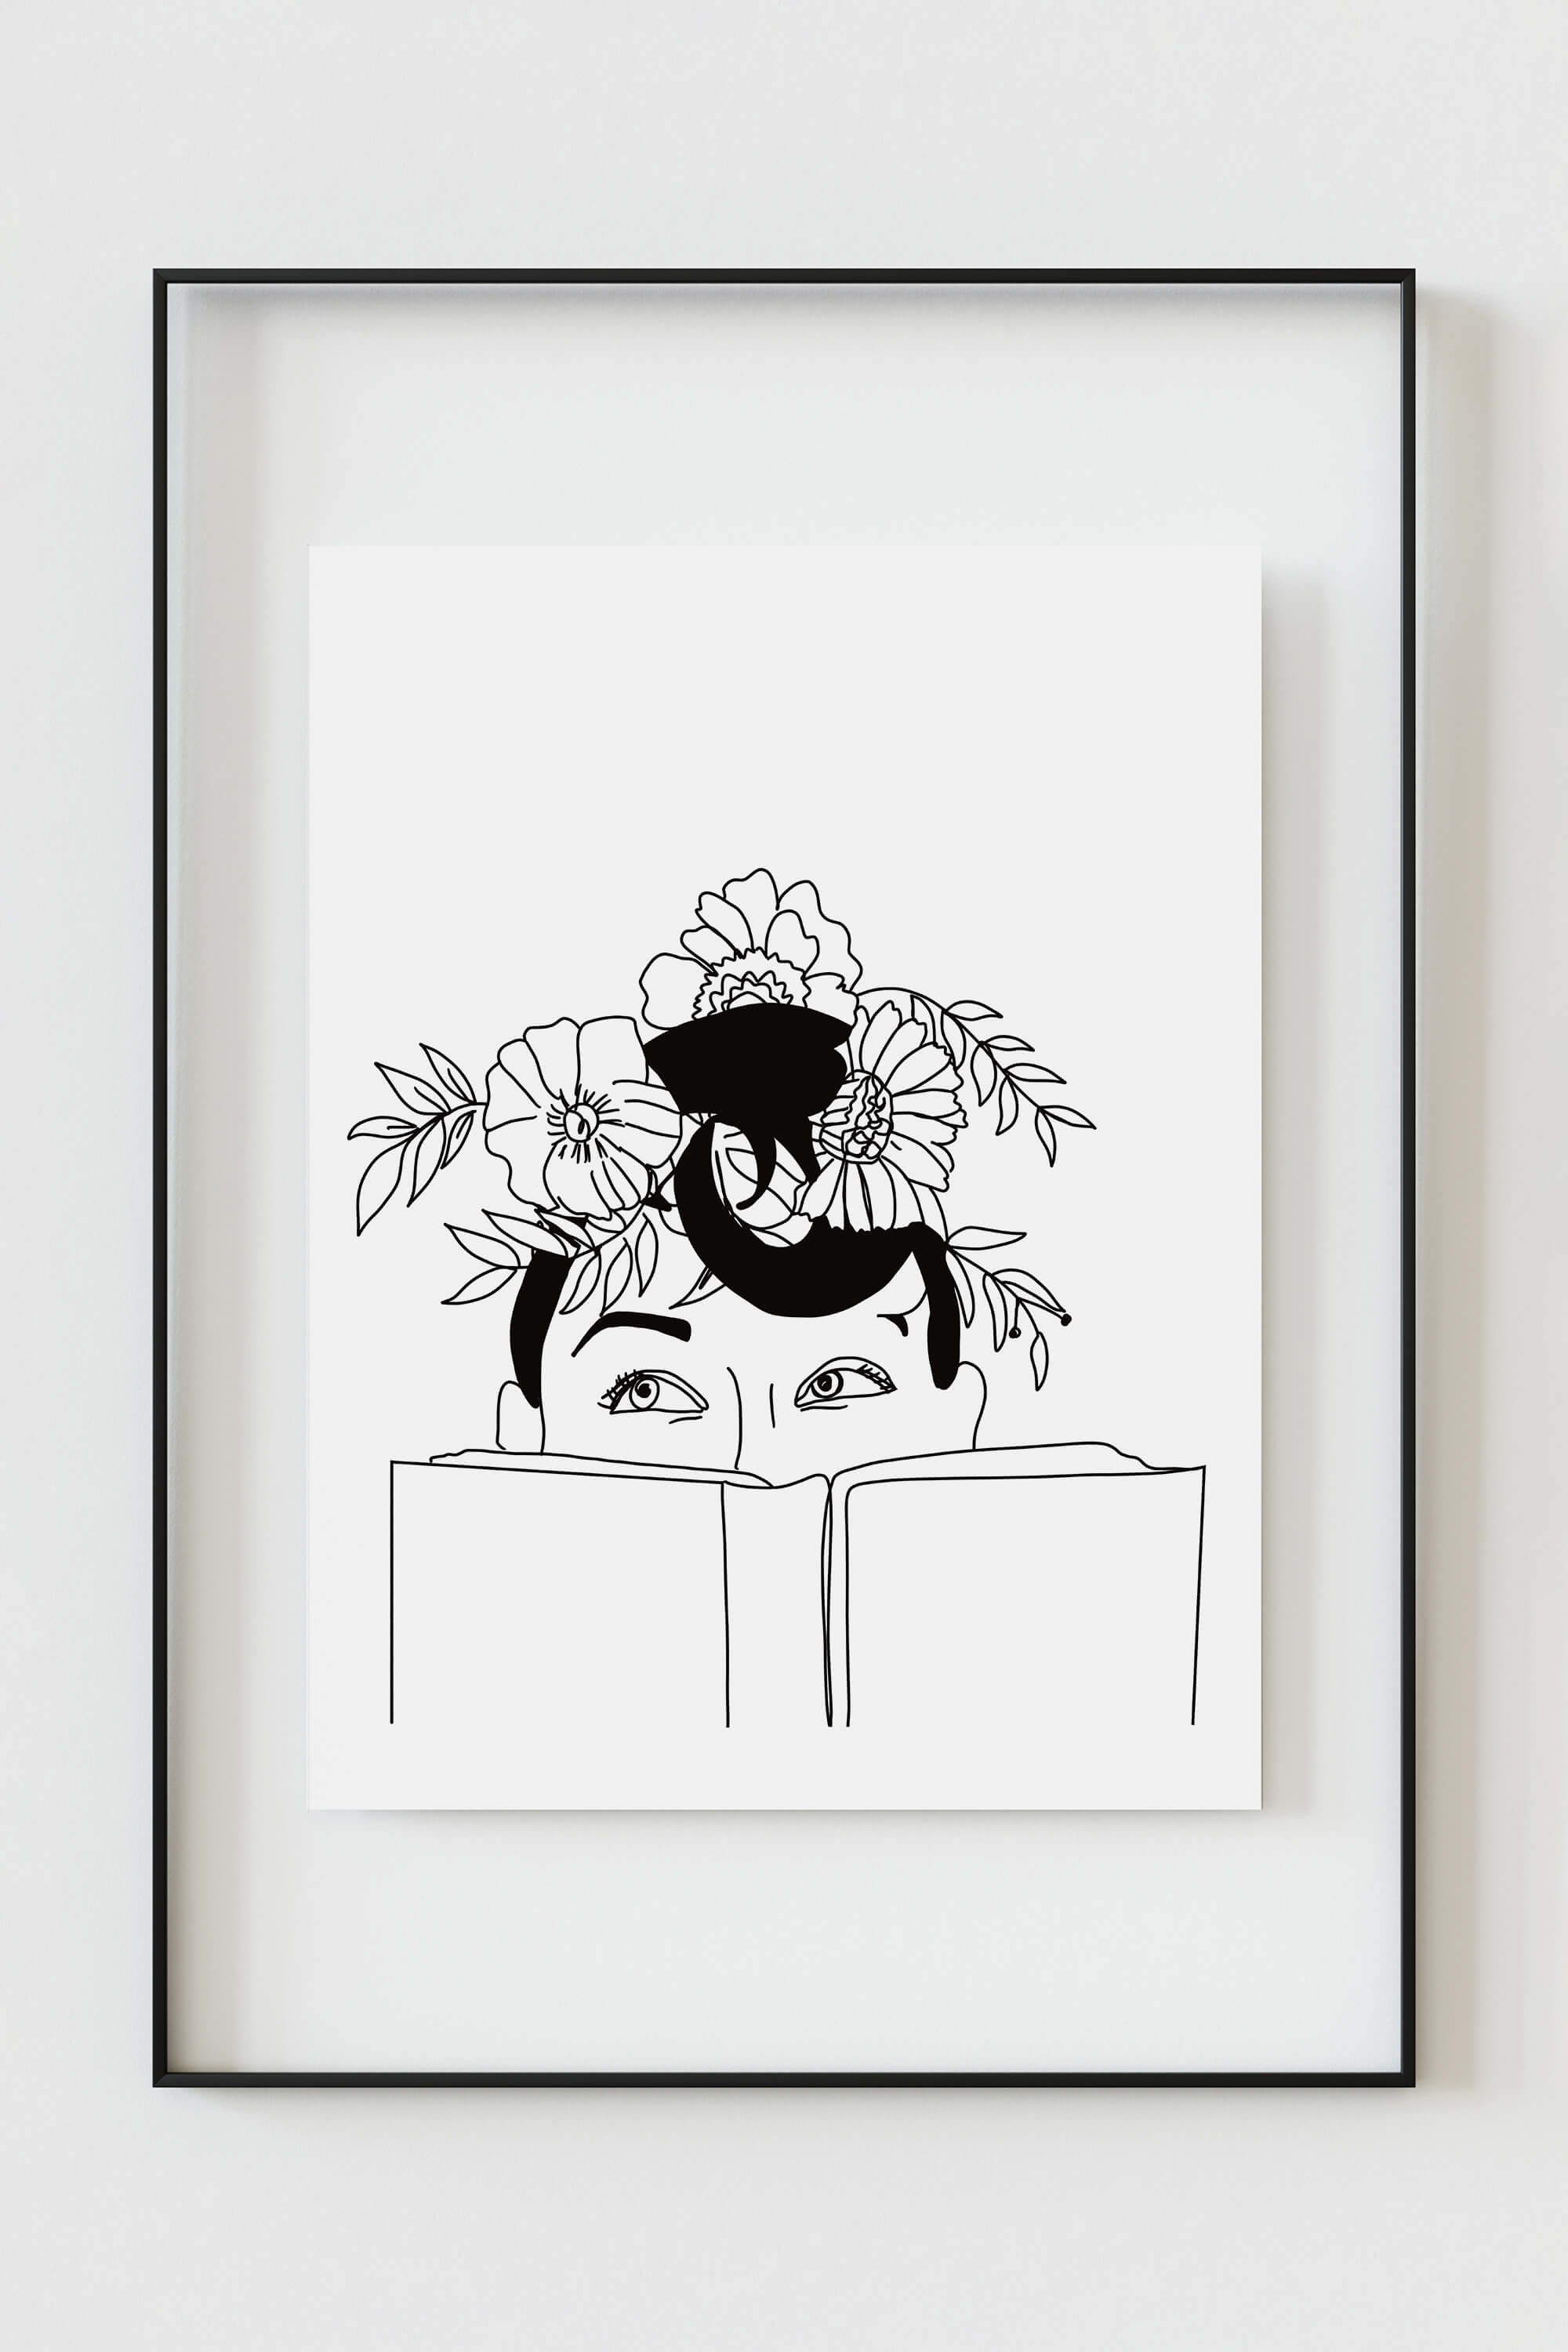 Serenity-themed line art print featuring a mesmerizing floral headpiece. Elevate your space with this captivating artwork, blending nature and art in a high-quality black-and-white composition.